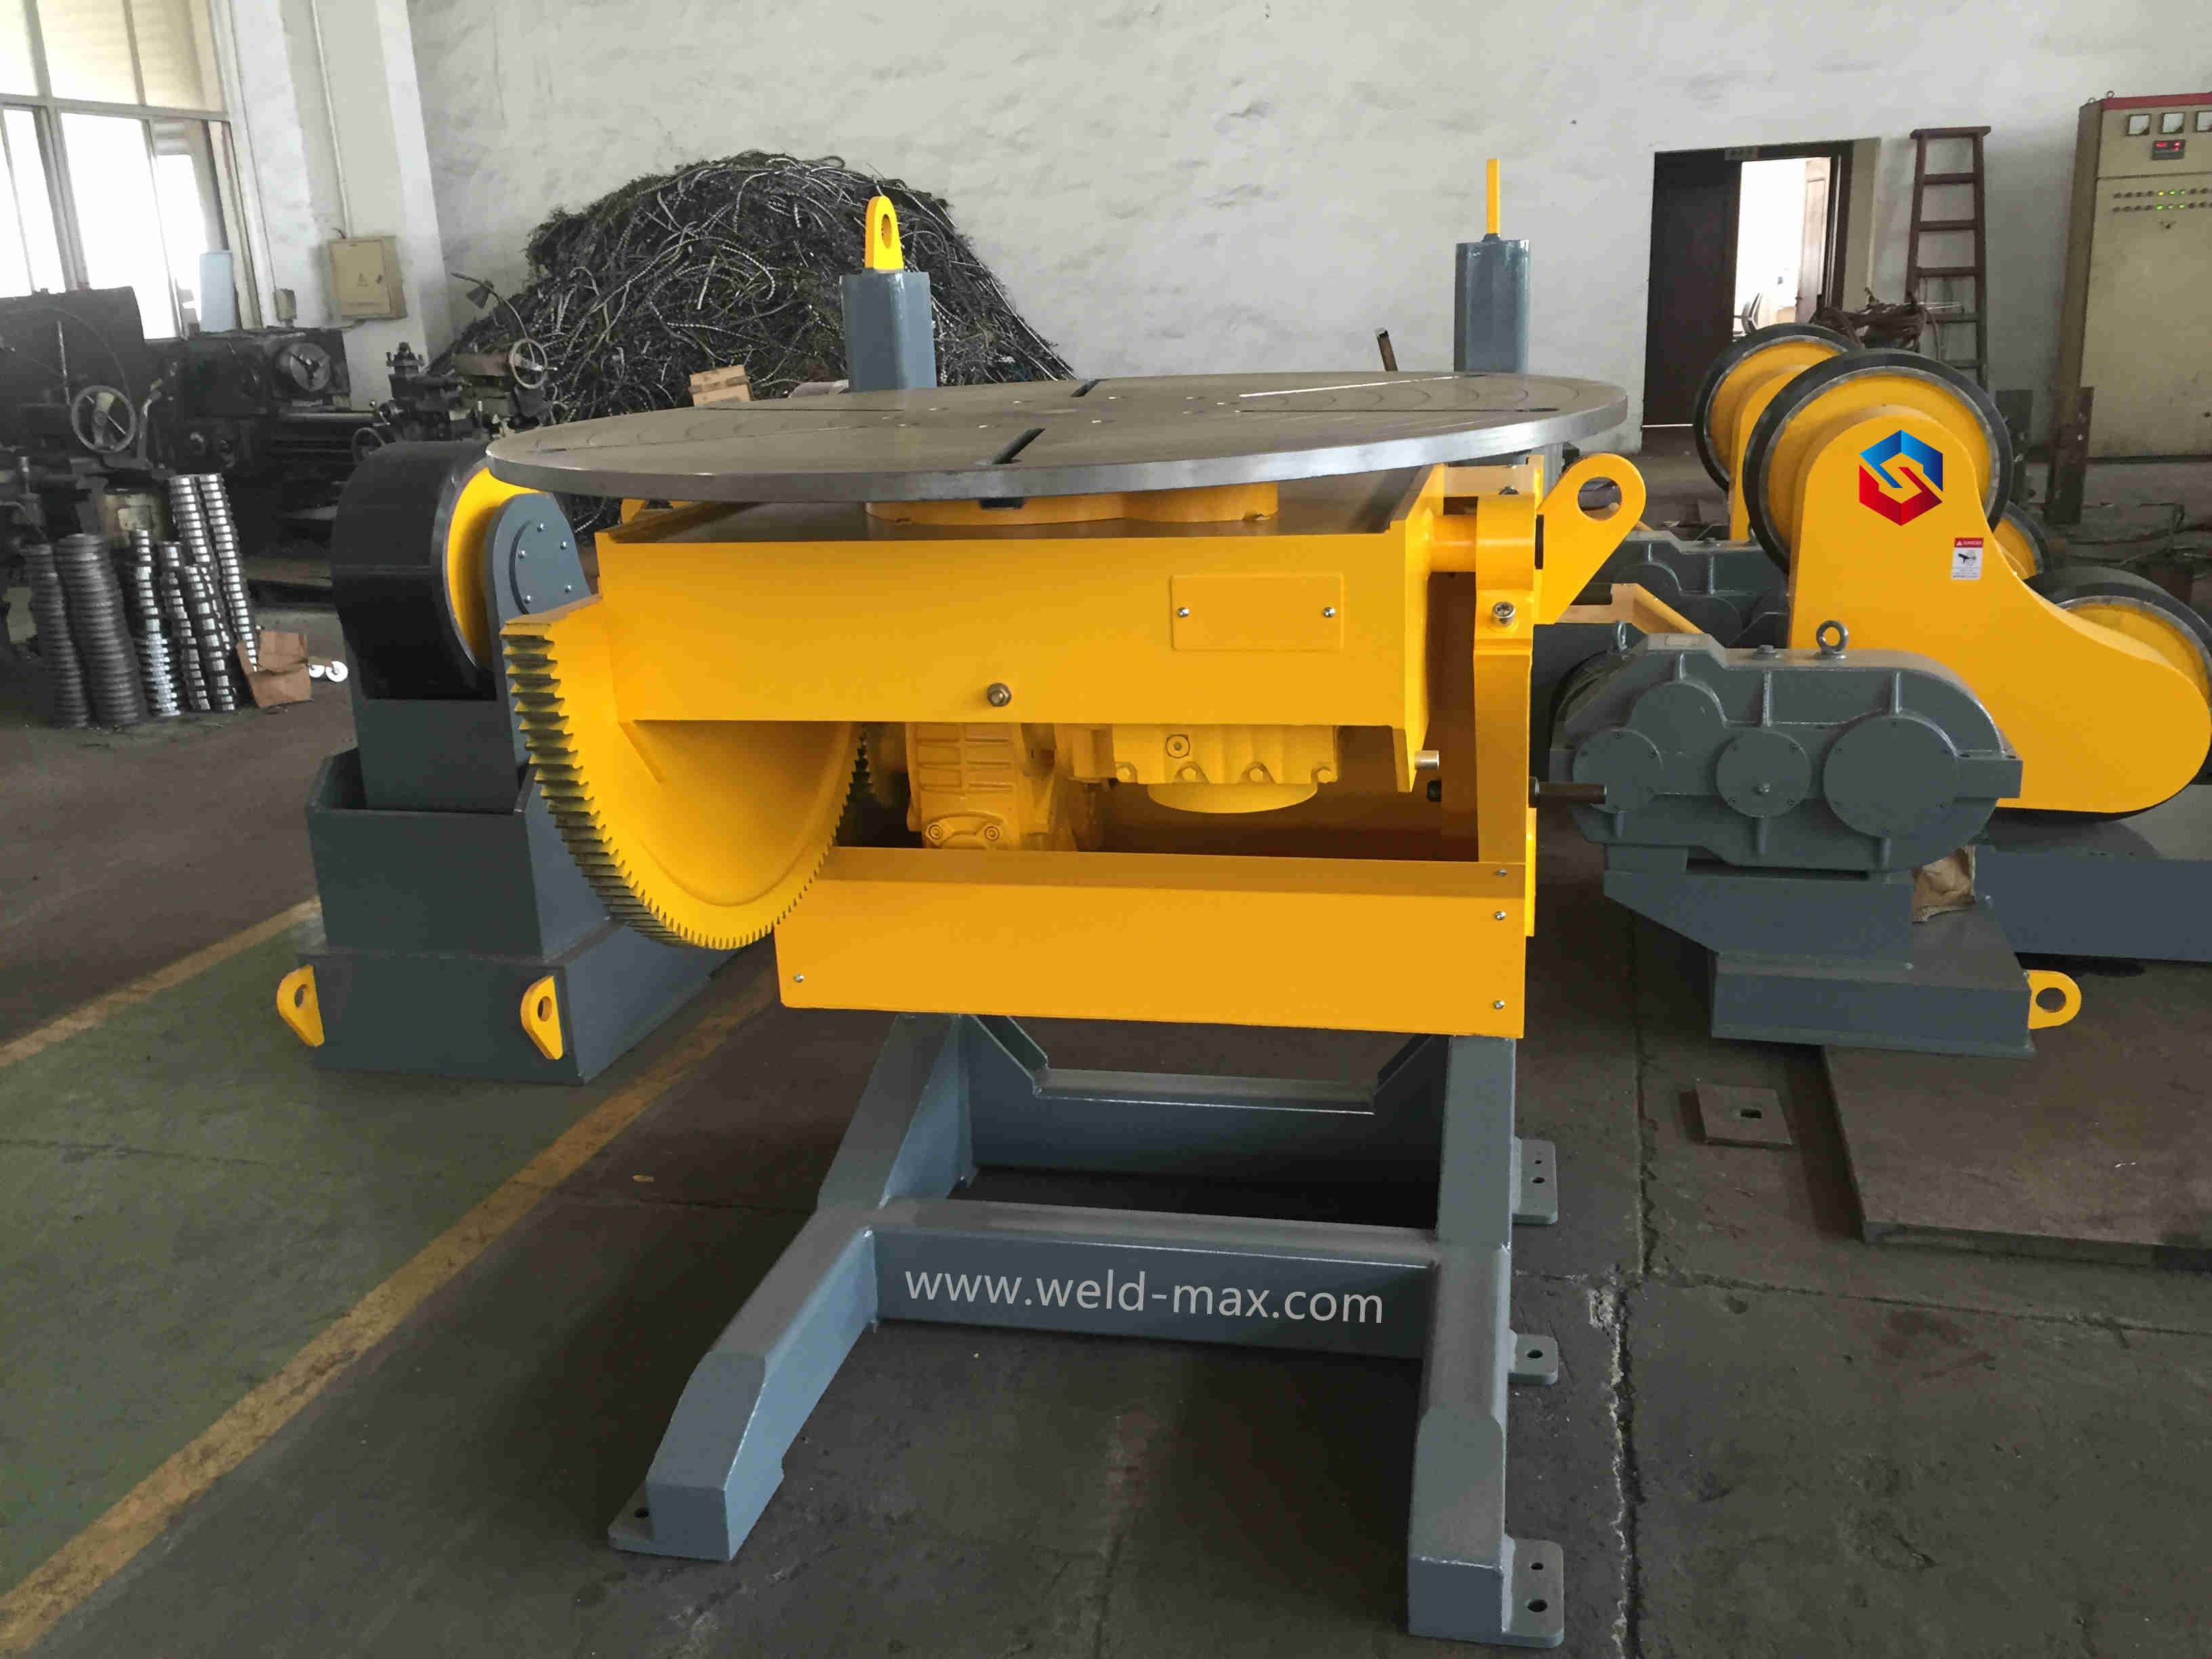 One of Hottest for 30ton Adjustable Turning Rolls - 30T Yellow Elevating Welding Positoner With Vertaical Turning Table And 5 JAWS Chuck – Sanlian